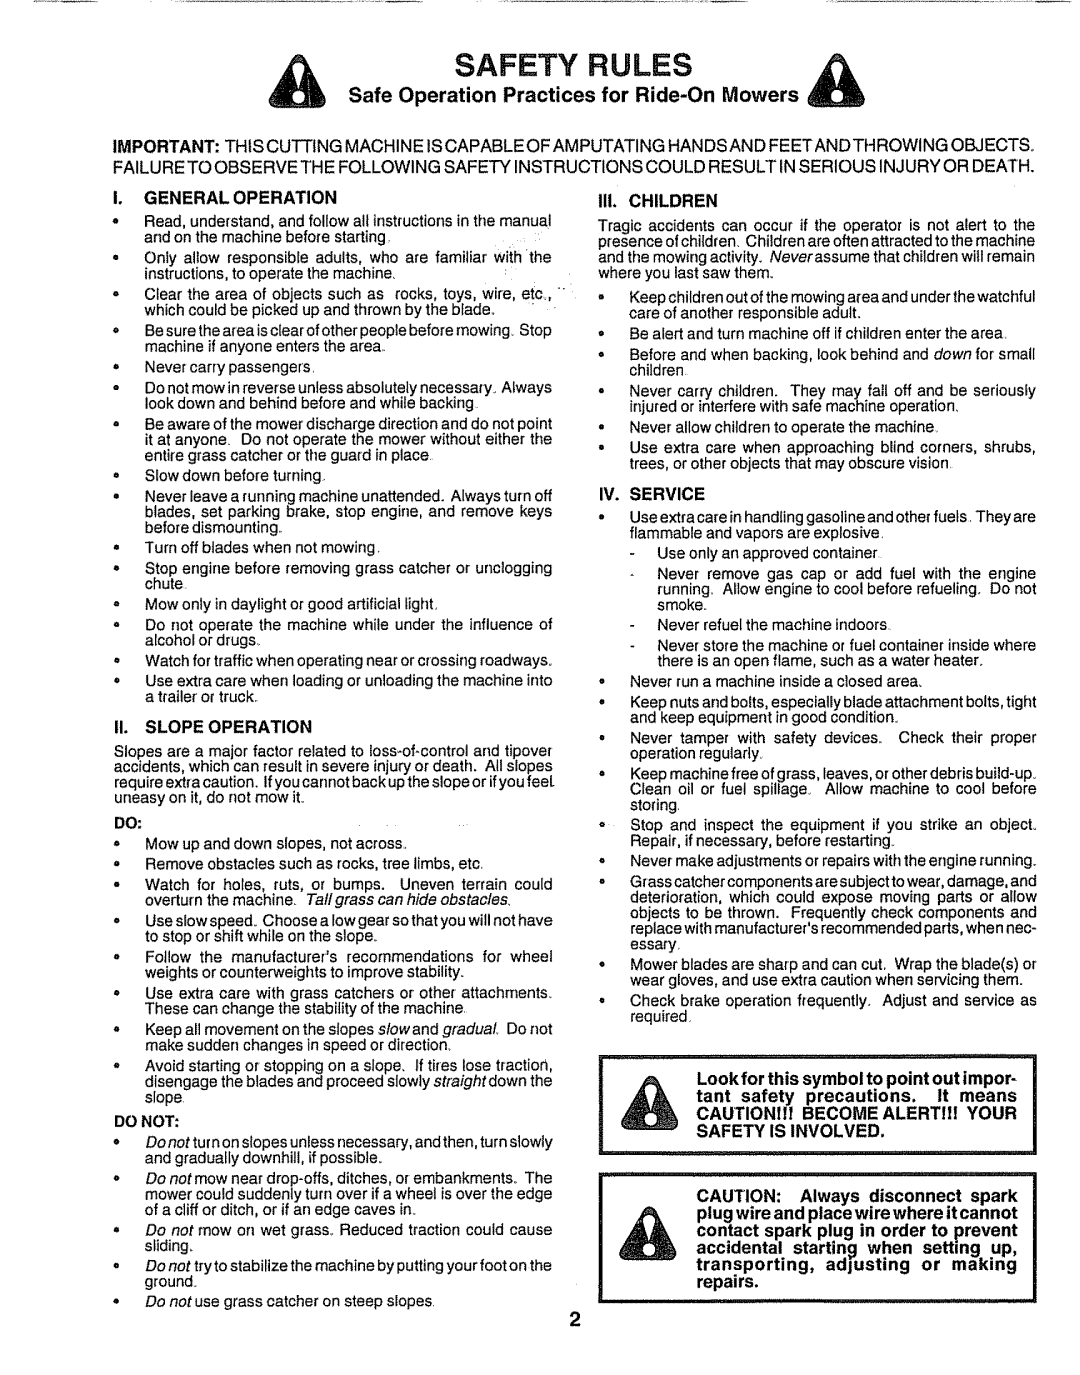 Sears 917.25597 owner manual Safety Rules, Safe Operation Practices for Ride-OnMowers, ill CHILDREN 